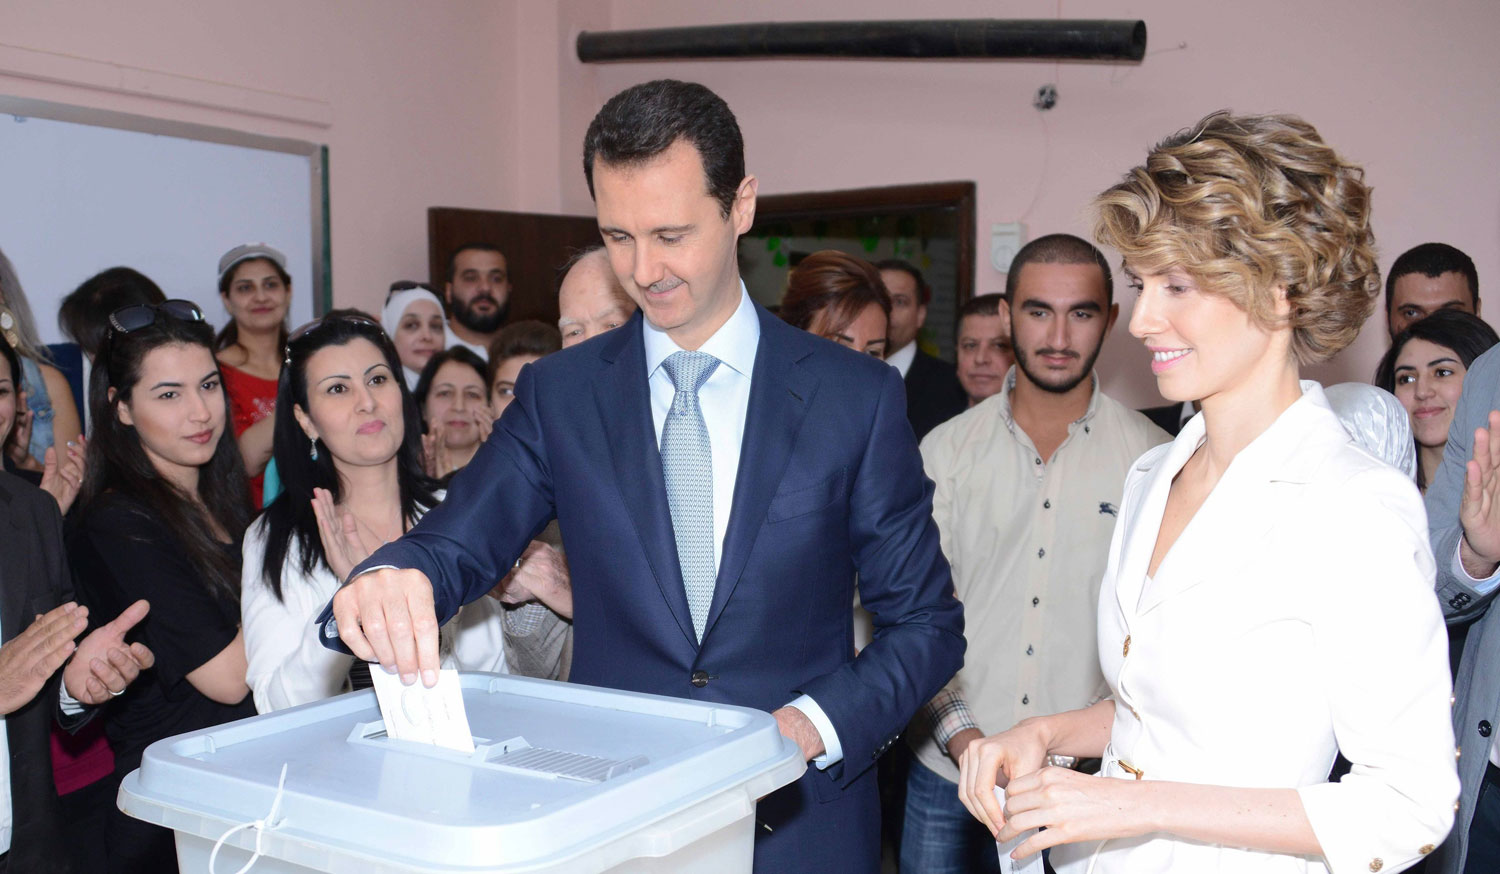 Syria's President Bashar al-Assad and his wife Asma cast their votes in the country's presidential elections at a polling station in Damascus